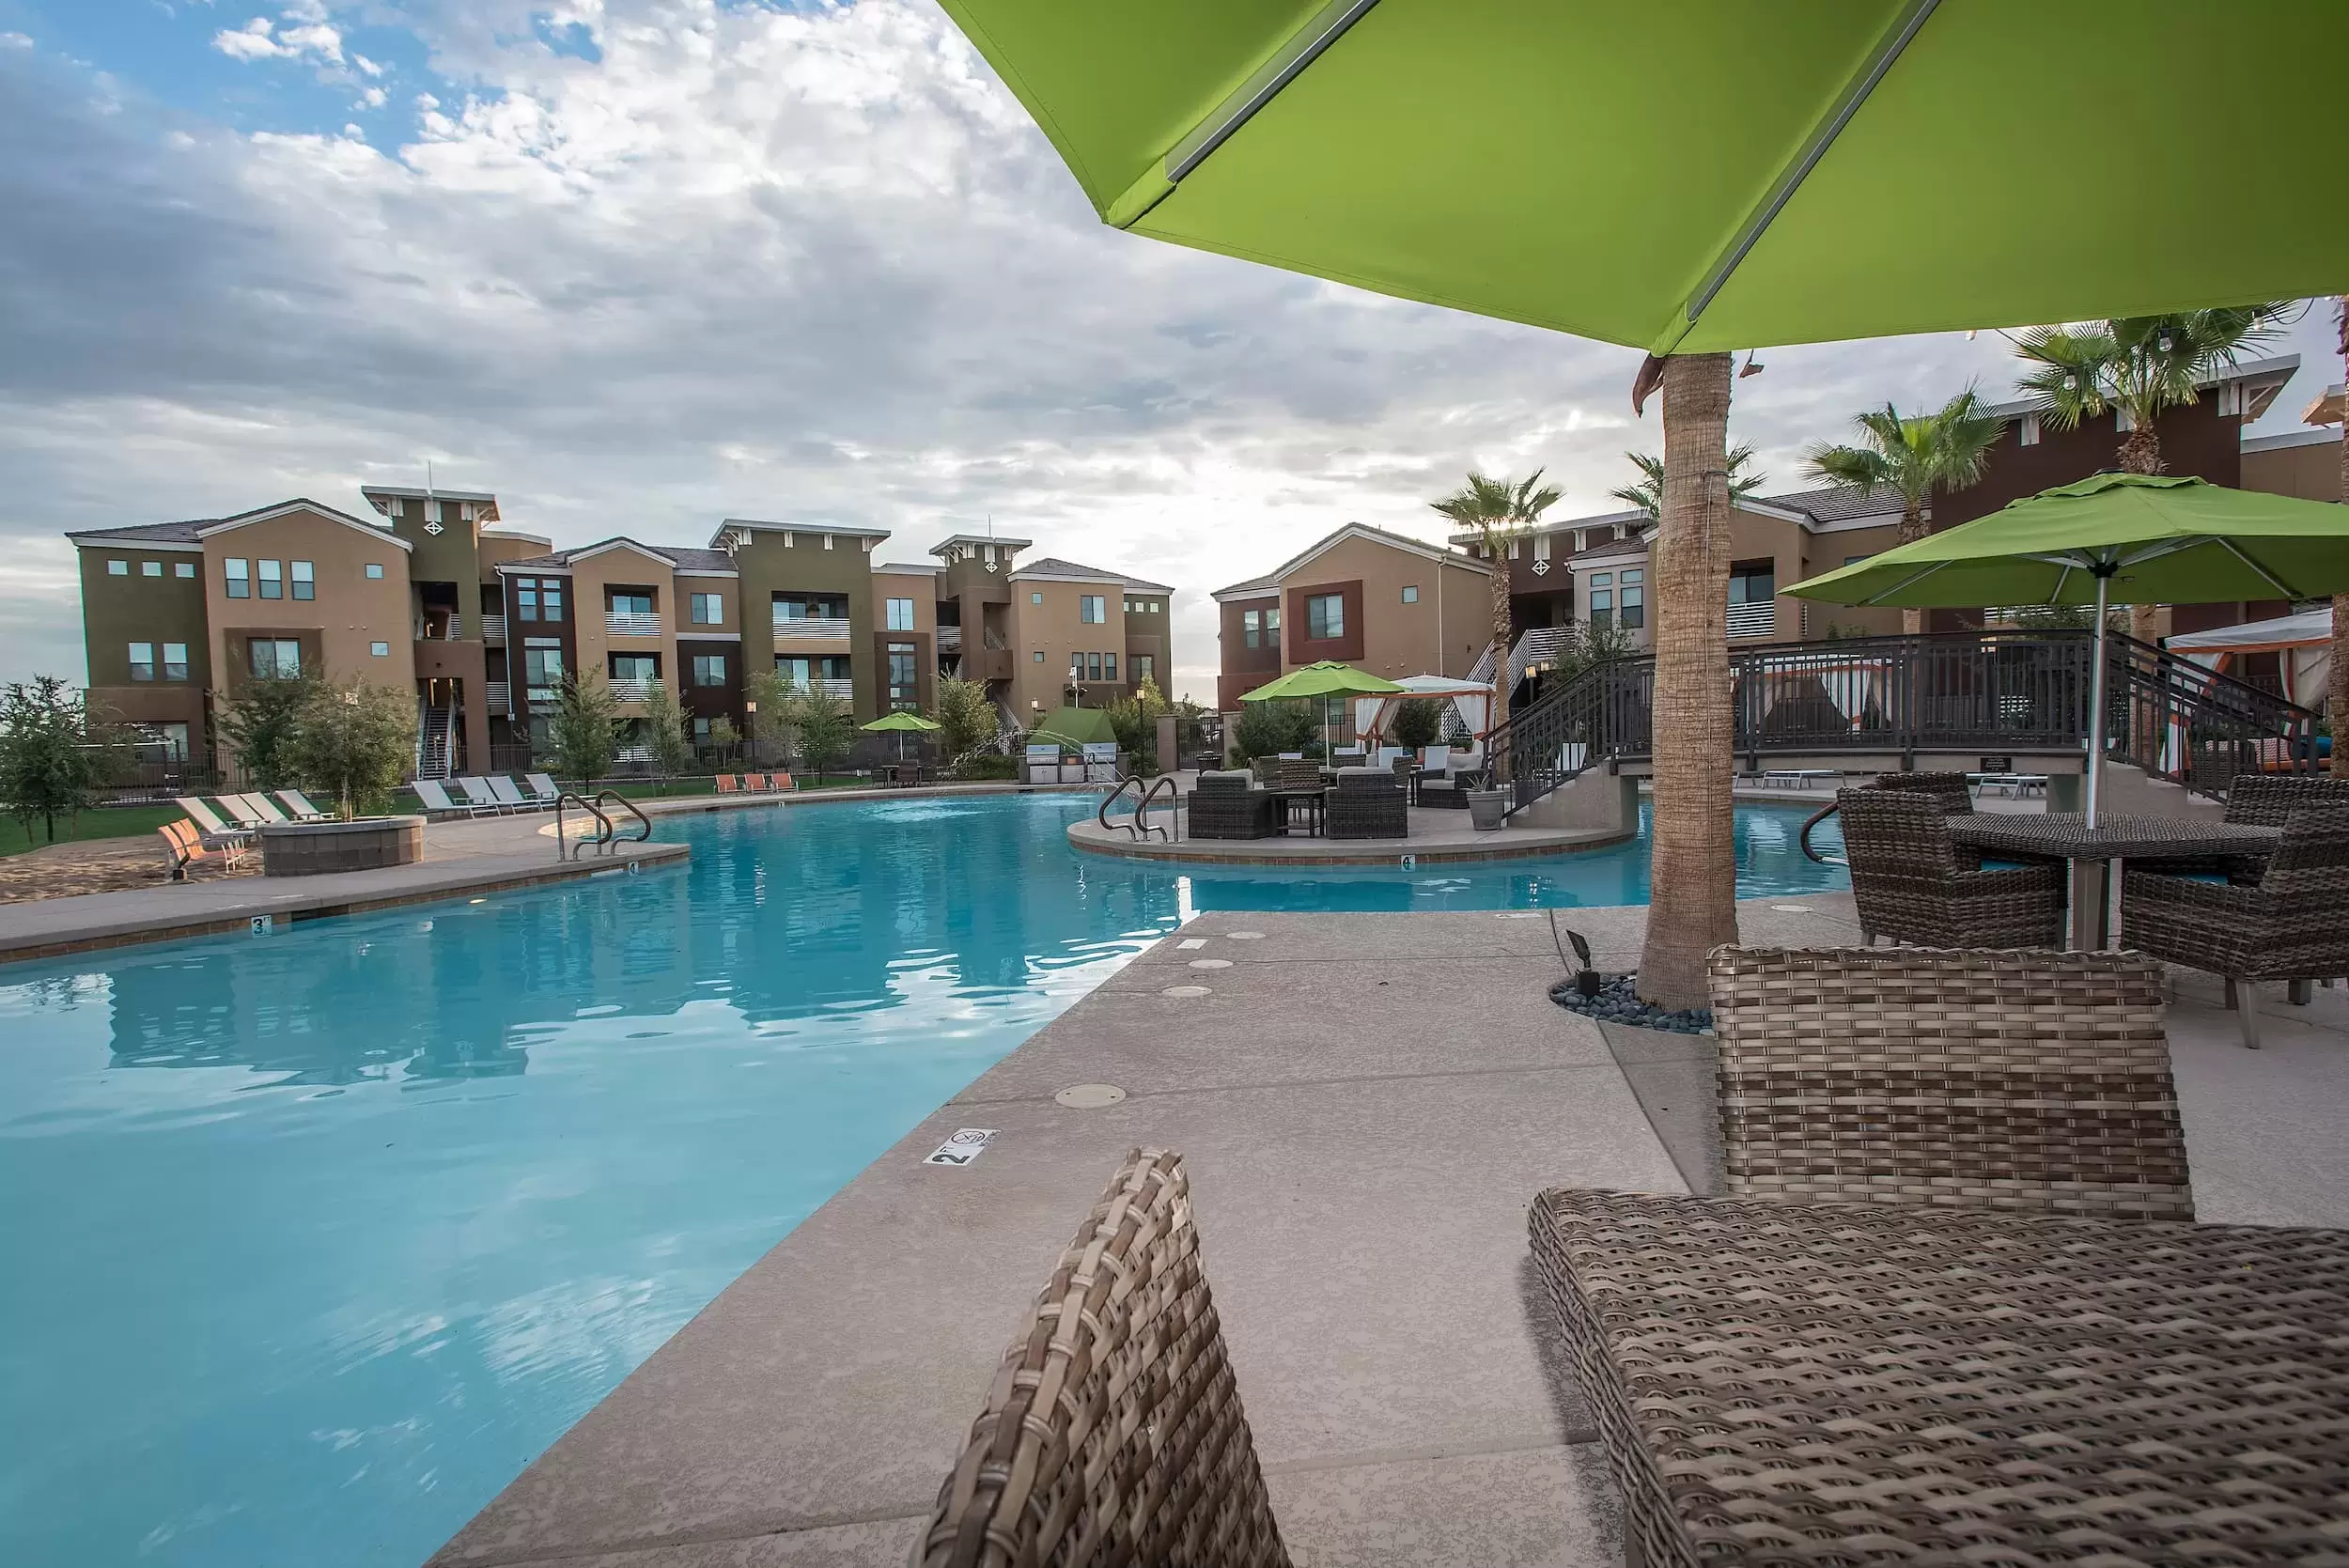 Chairs and tables with umbrellas on the pool deck at the luxury apartment complex.